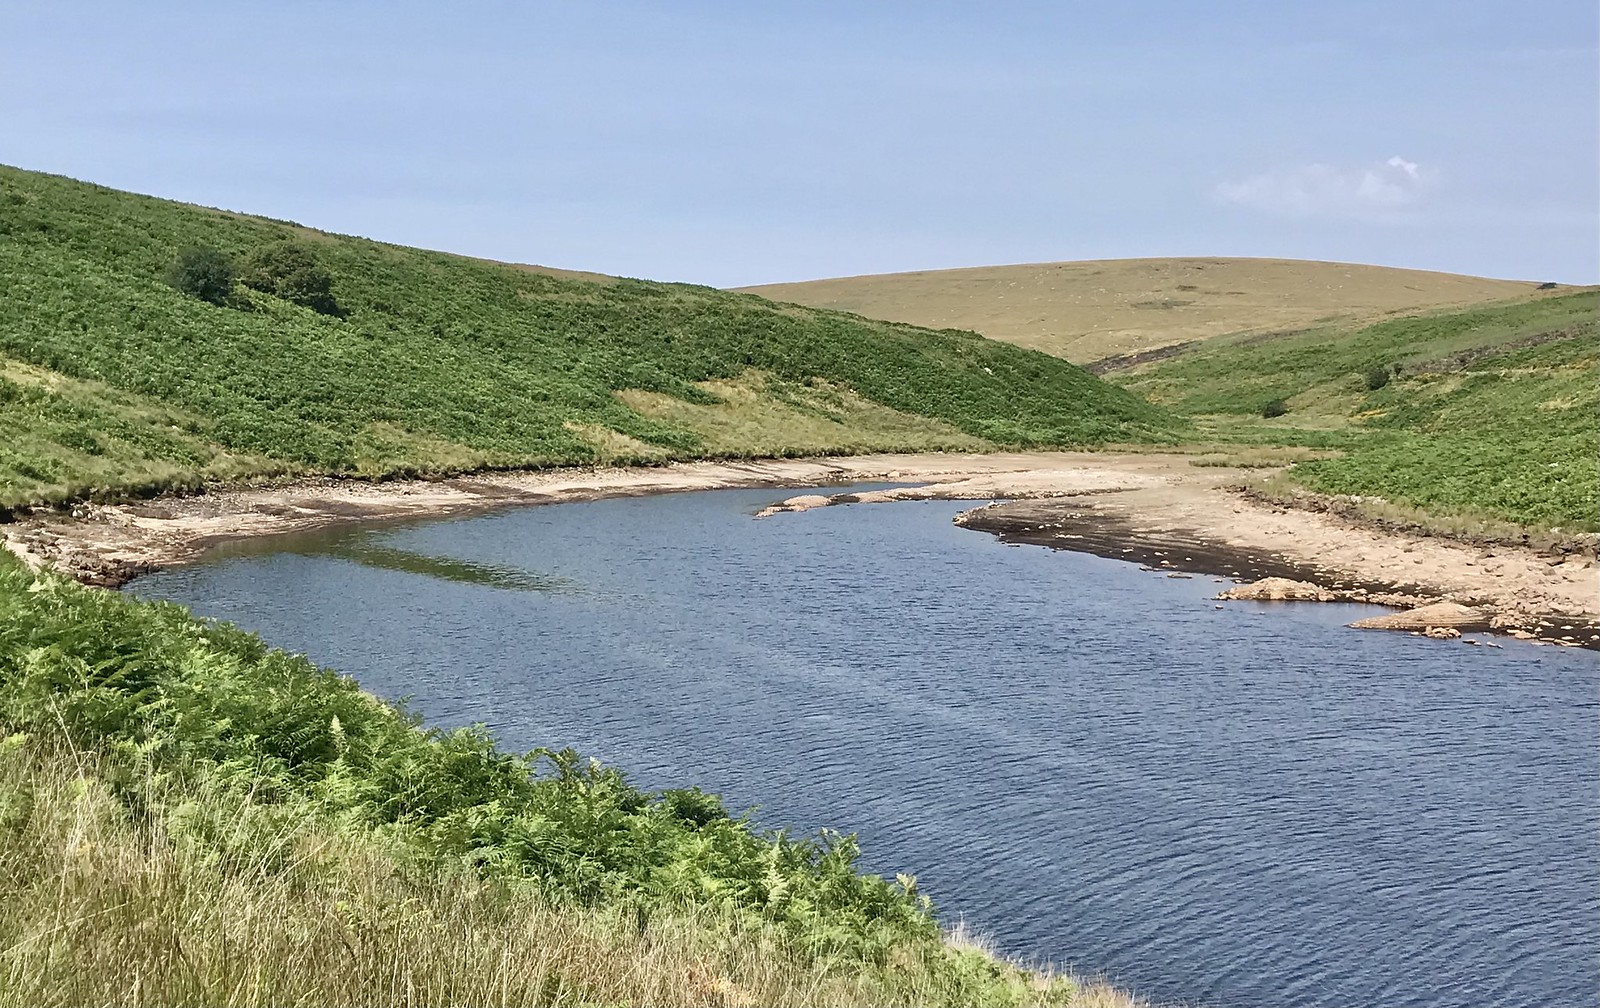 Water level of the Avon Reservoir - August 14th 2022